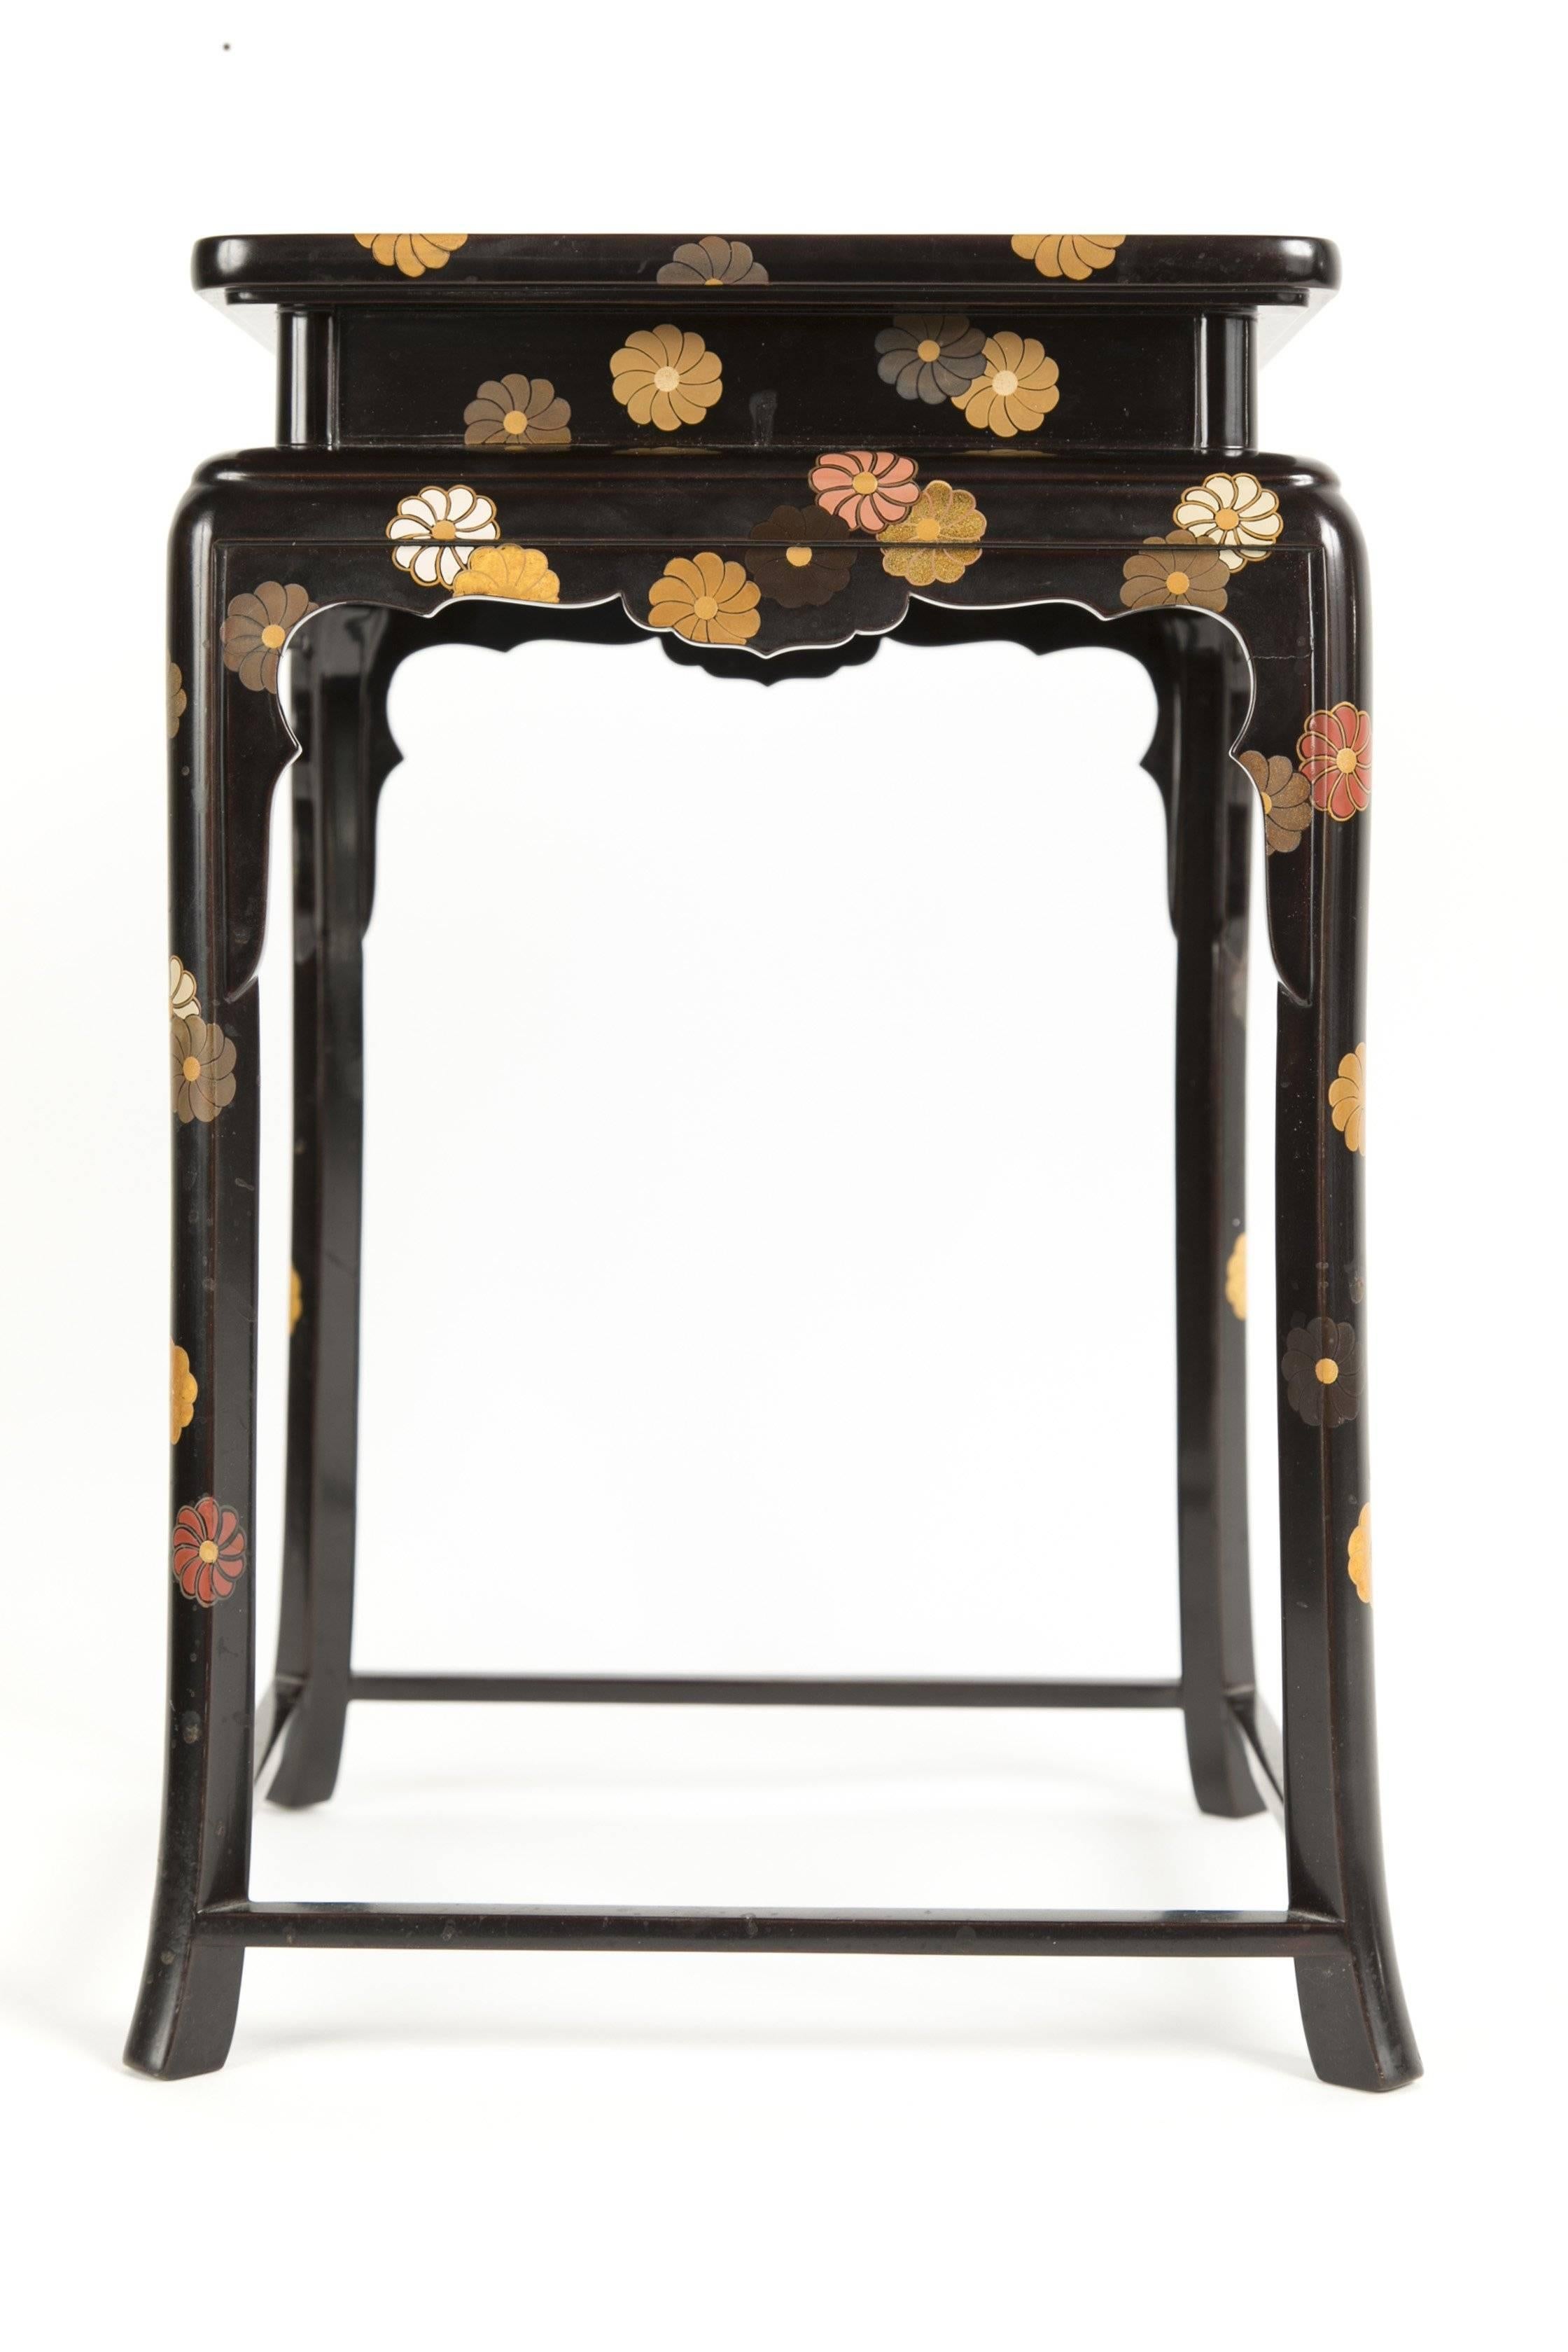 A Japanese black lacquered low side table with Chrysanthemums randomly decorating all surfaces of the table.   Signature to underside of table along with signed Presentation/Storage (Tomobako) Box and cloth storage bag. 